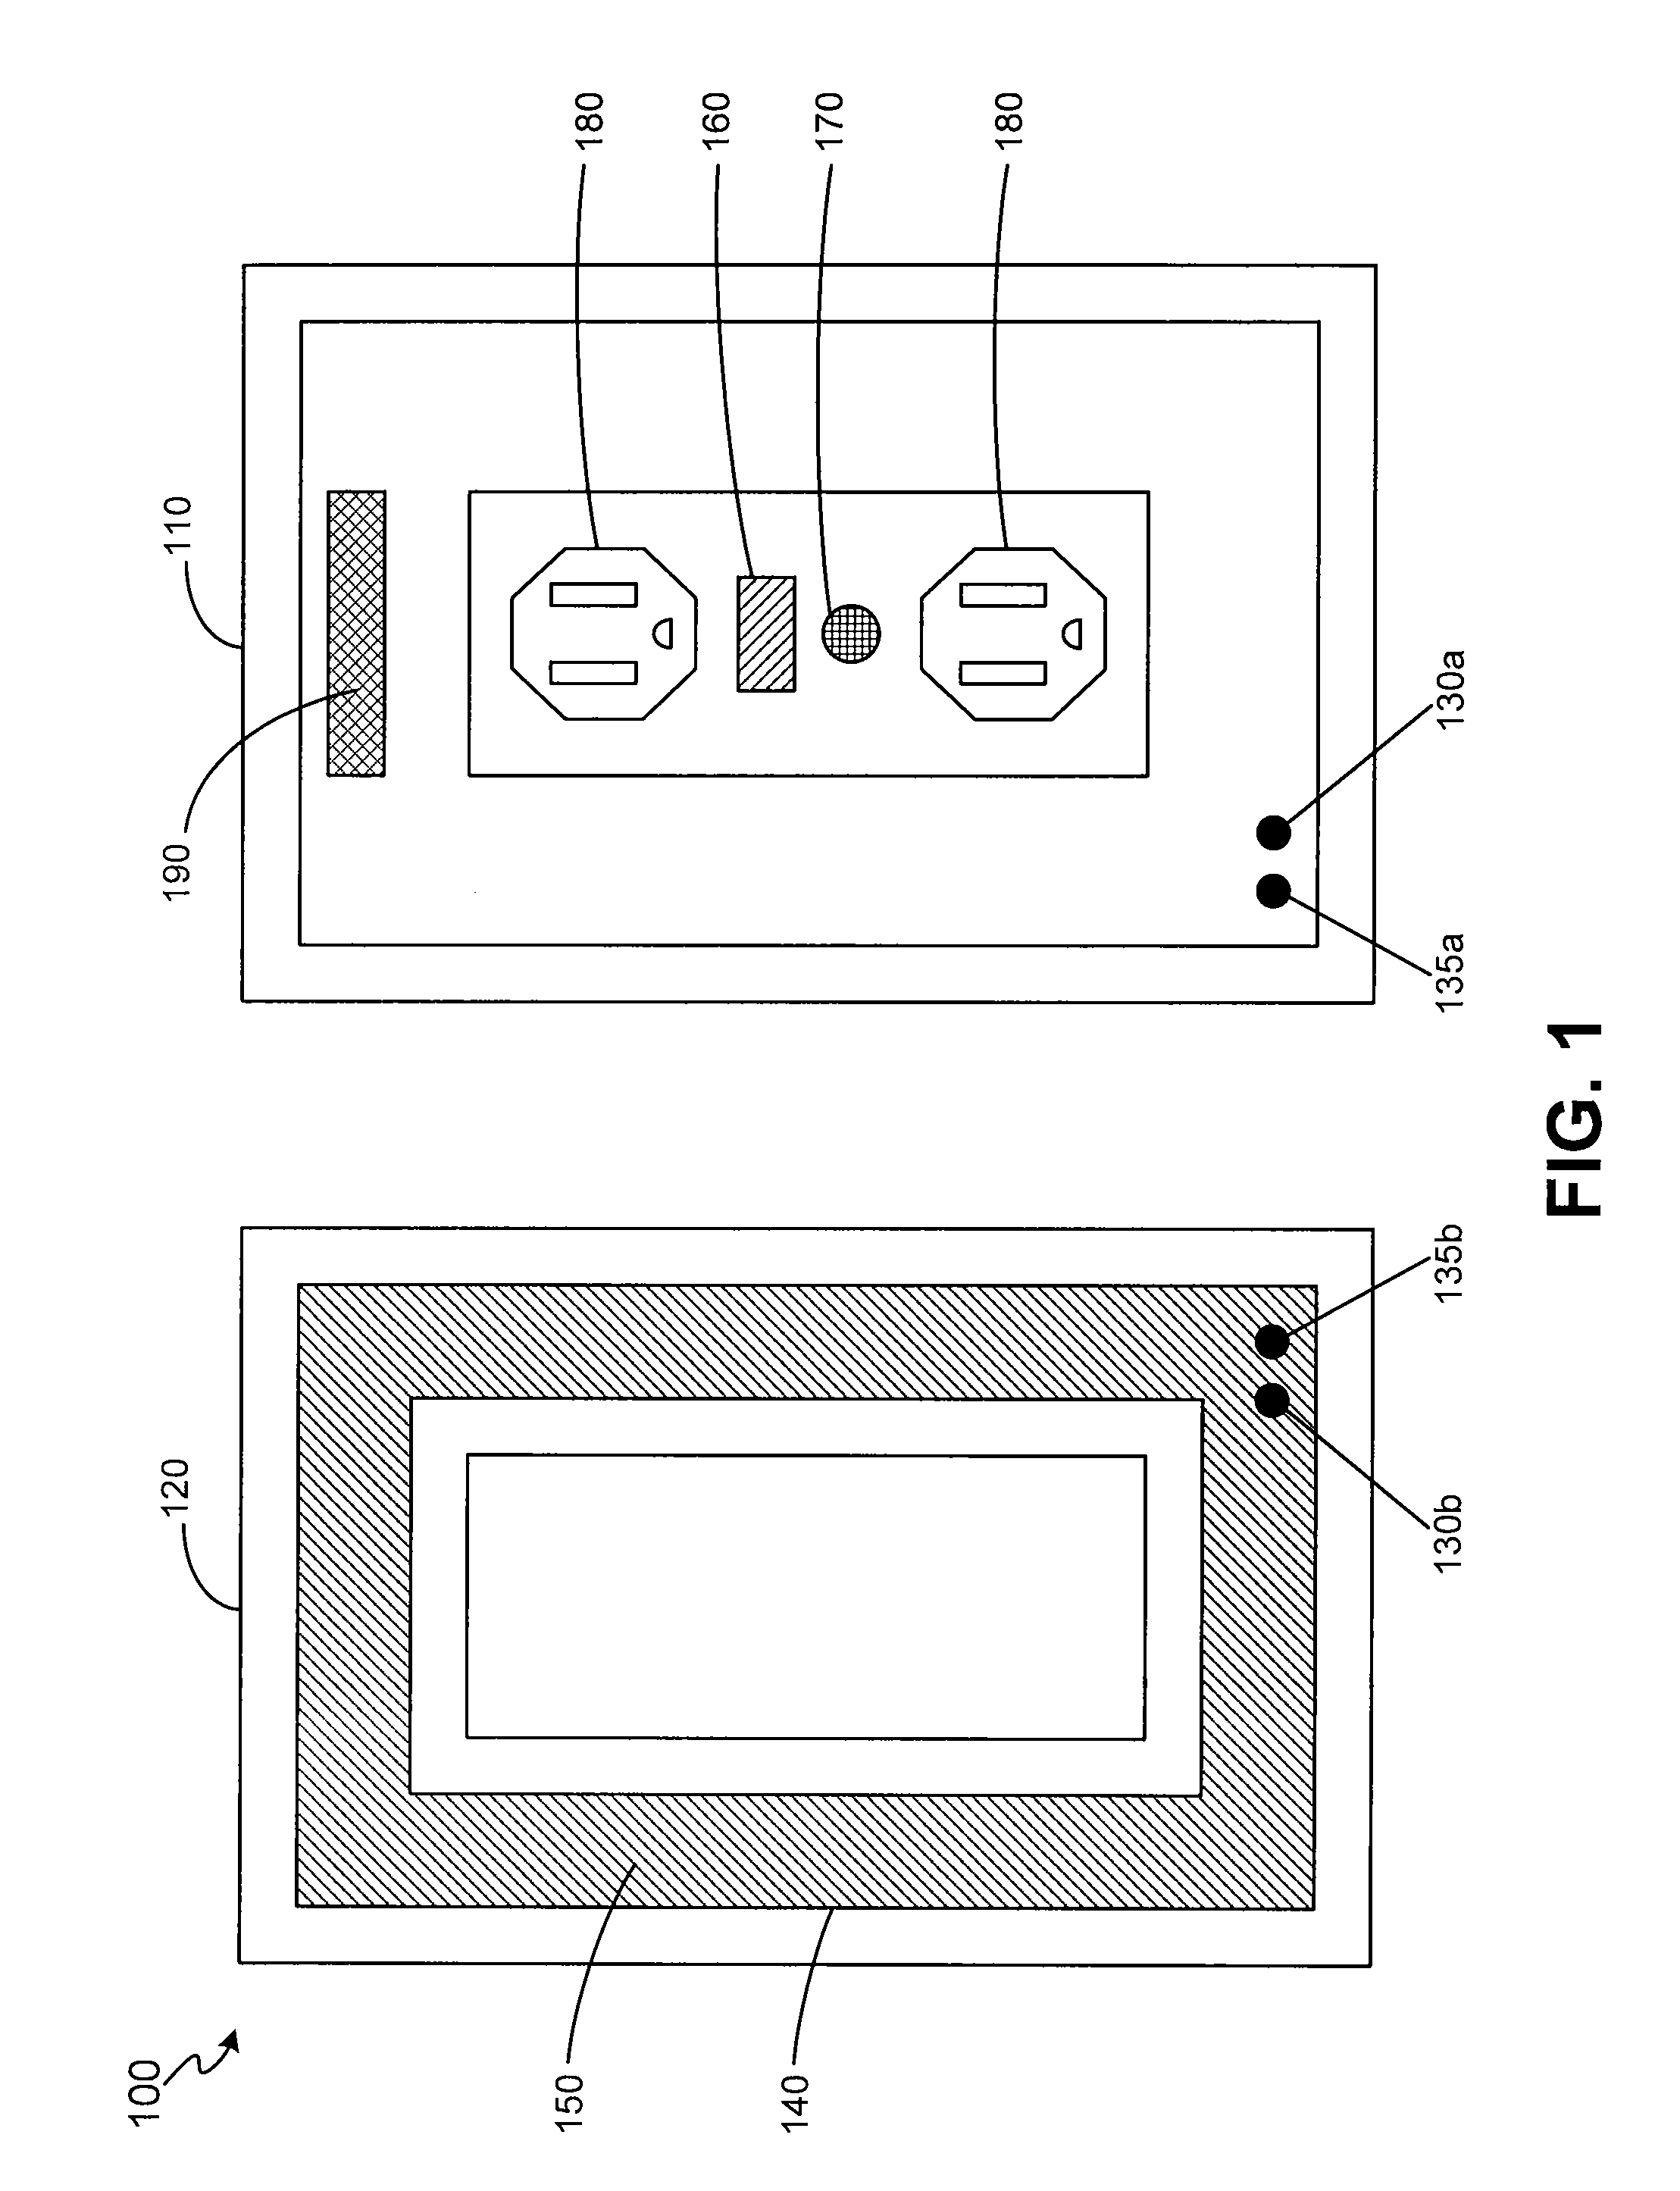 Vapor-emitting device with an active end of use indicator